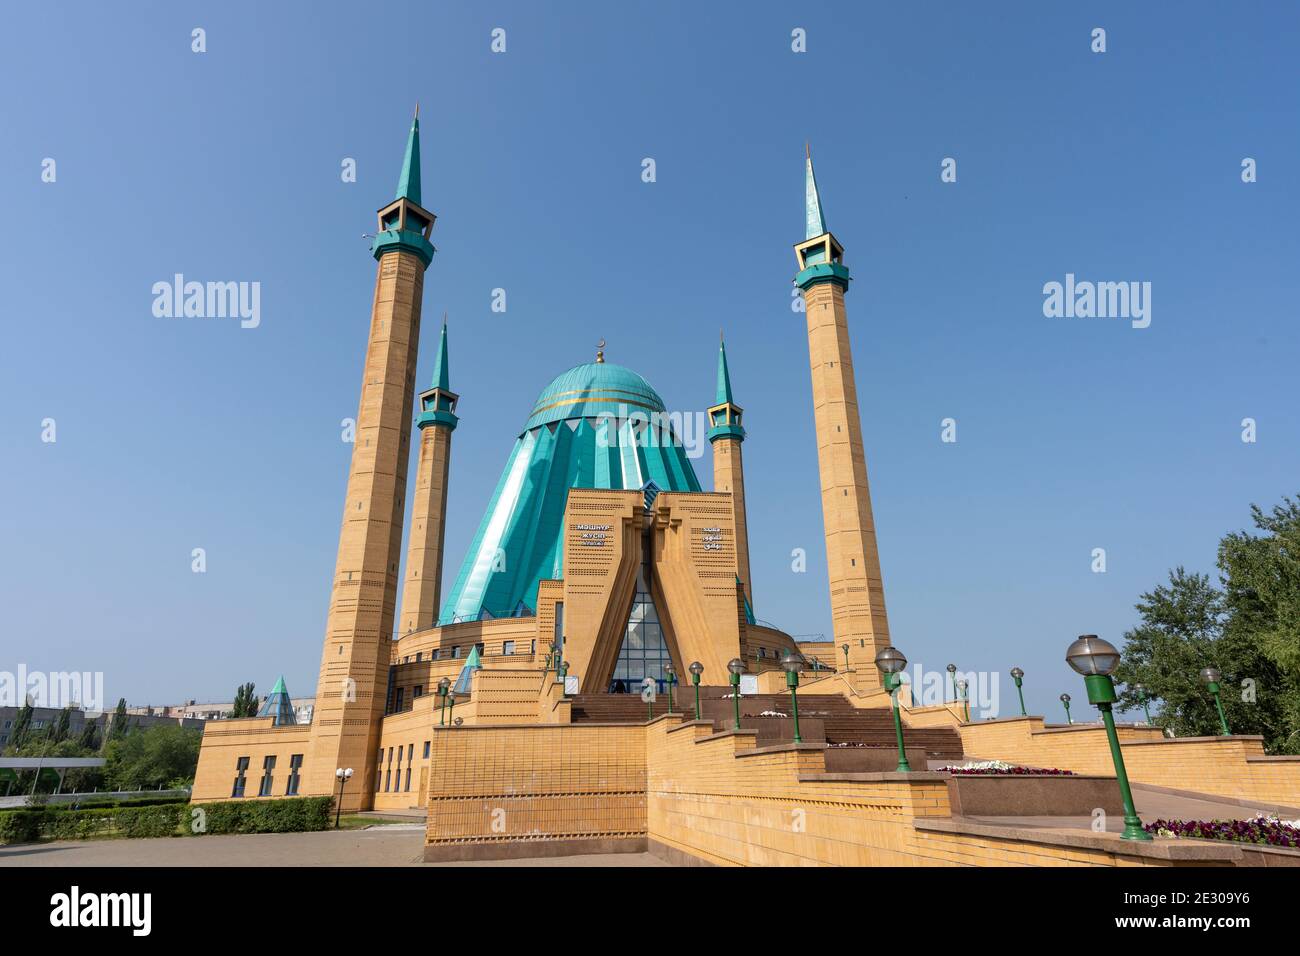 Pavlodar, Kazakhstan - July 27, 2020: the entrance of the Mashkhur Jusup Mosque with four minarets and blue roof. Stock Photo